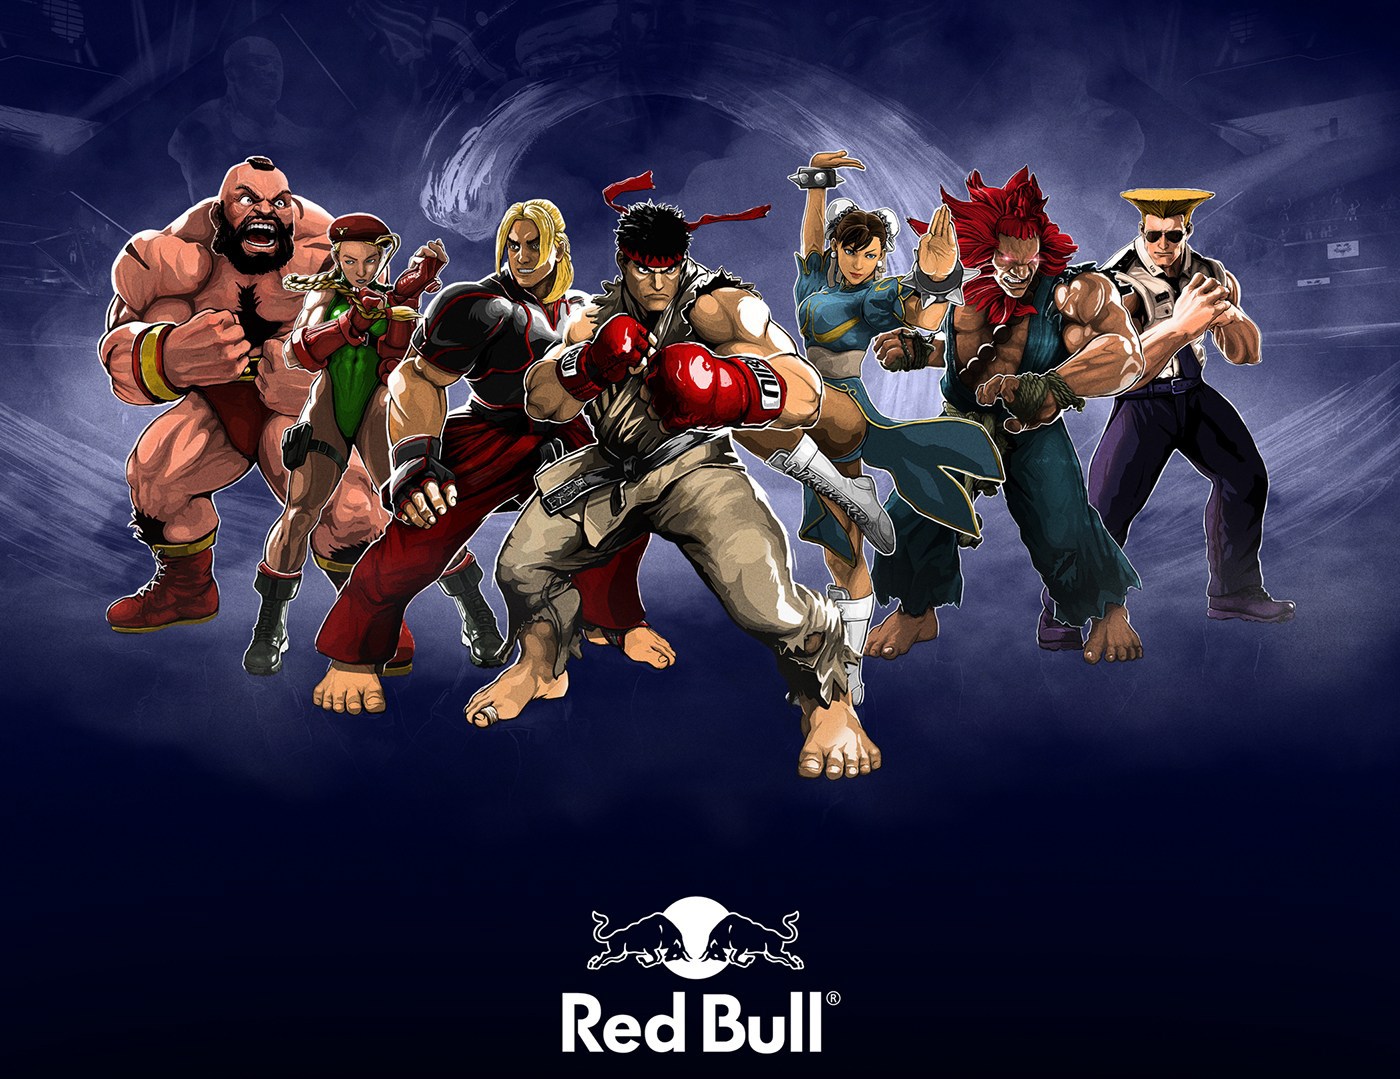 ilovedust Red Bull STREET FIGHTER characters energy drink ILLUSTRATION 